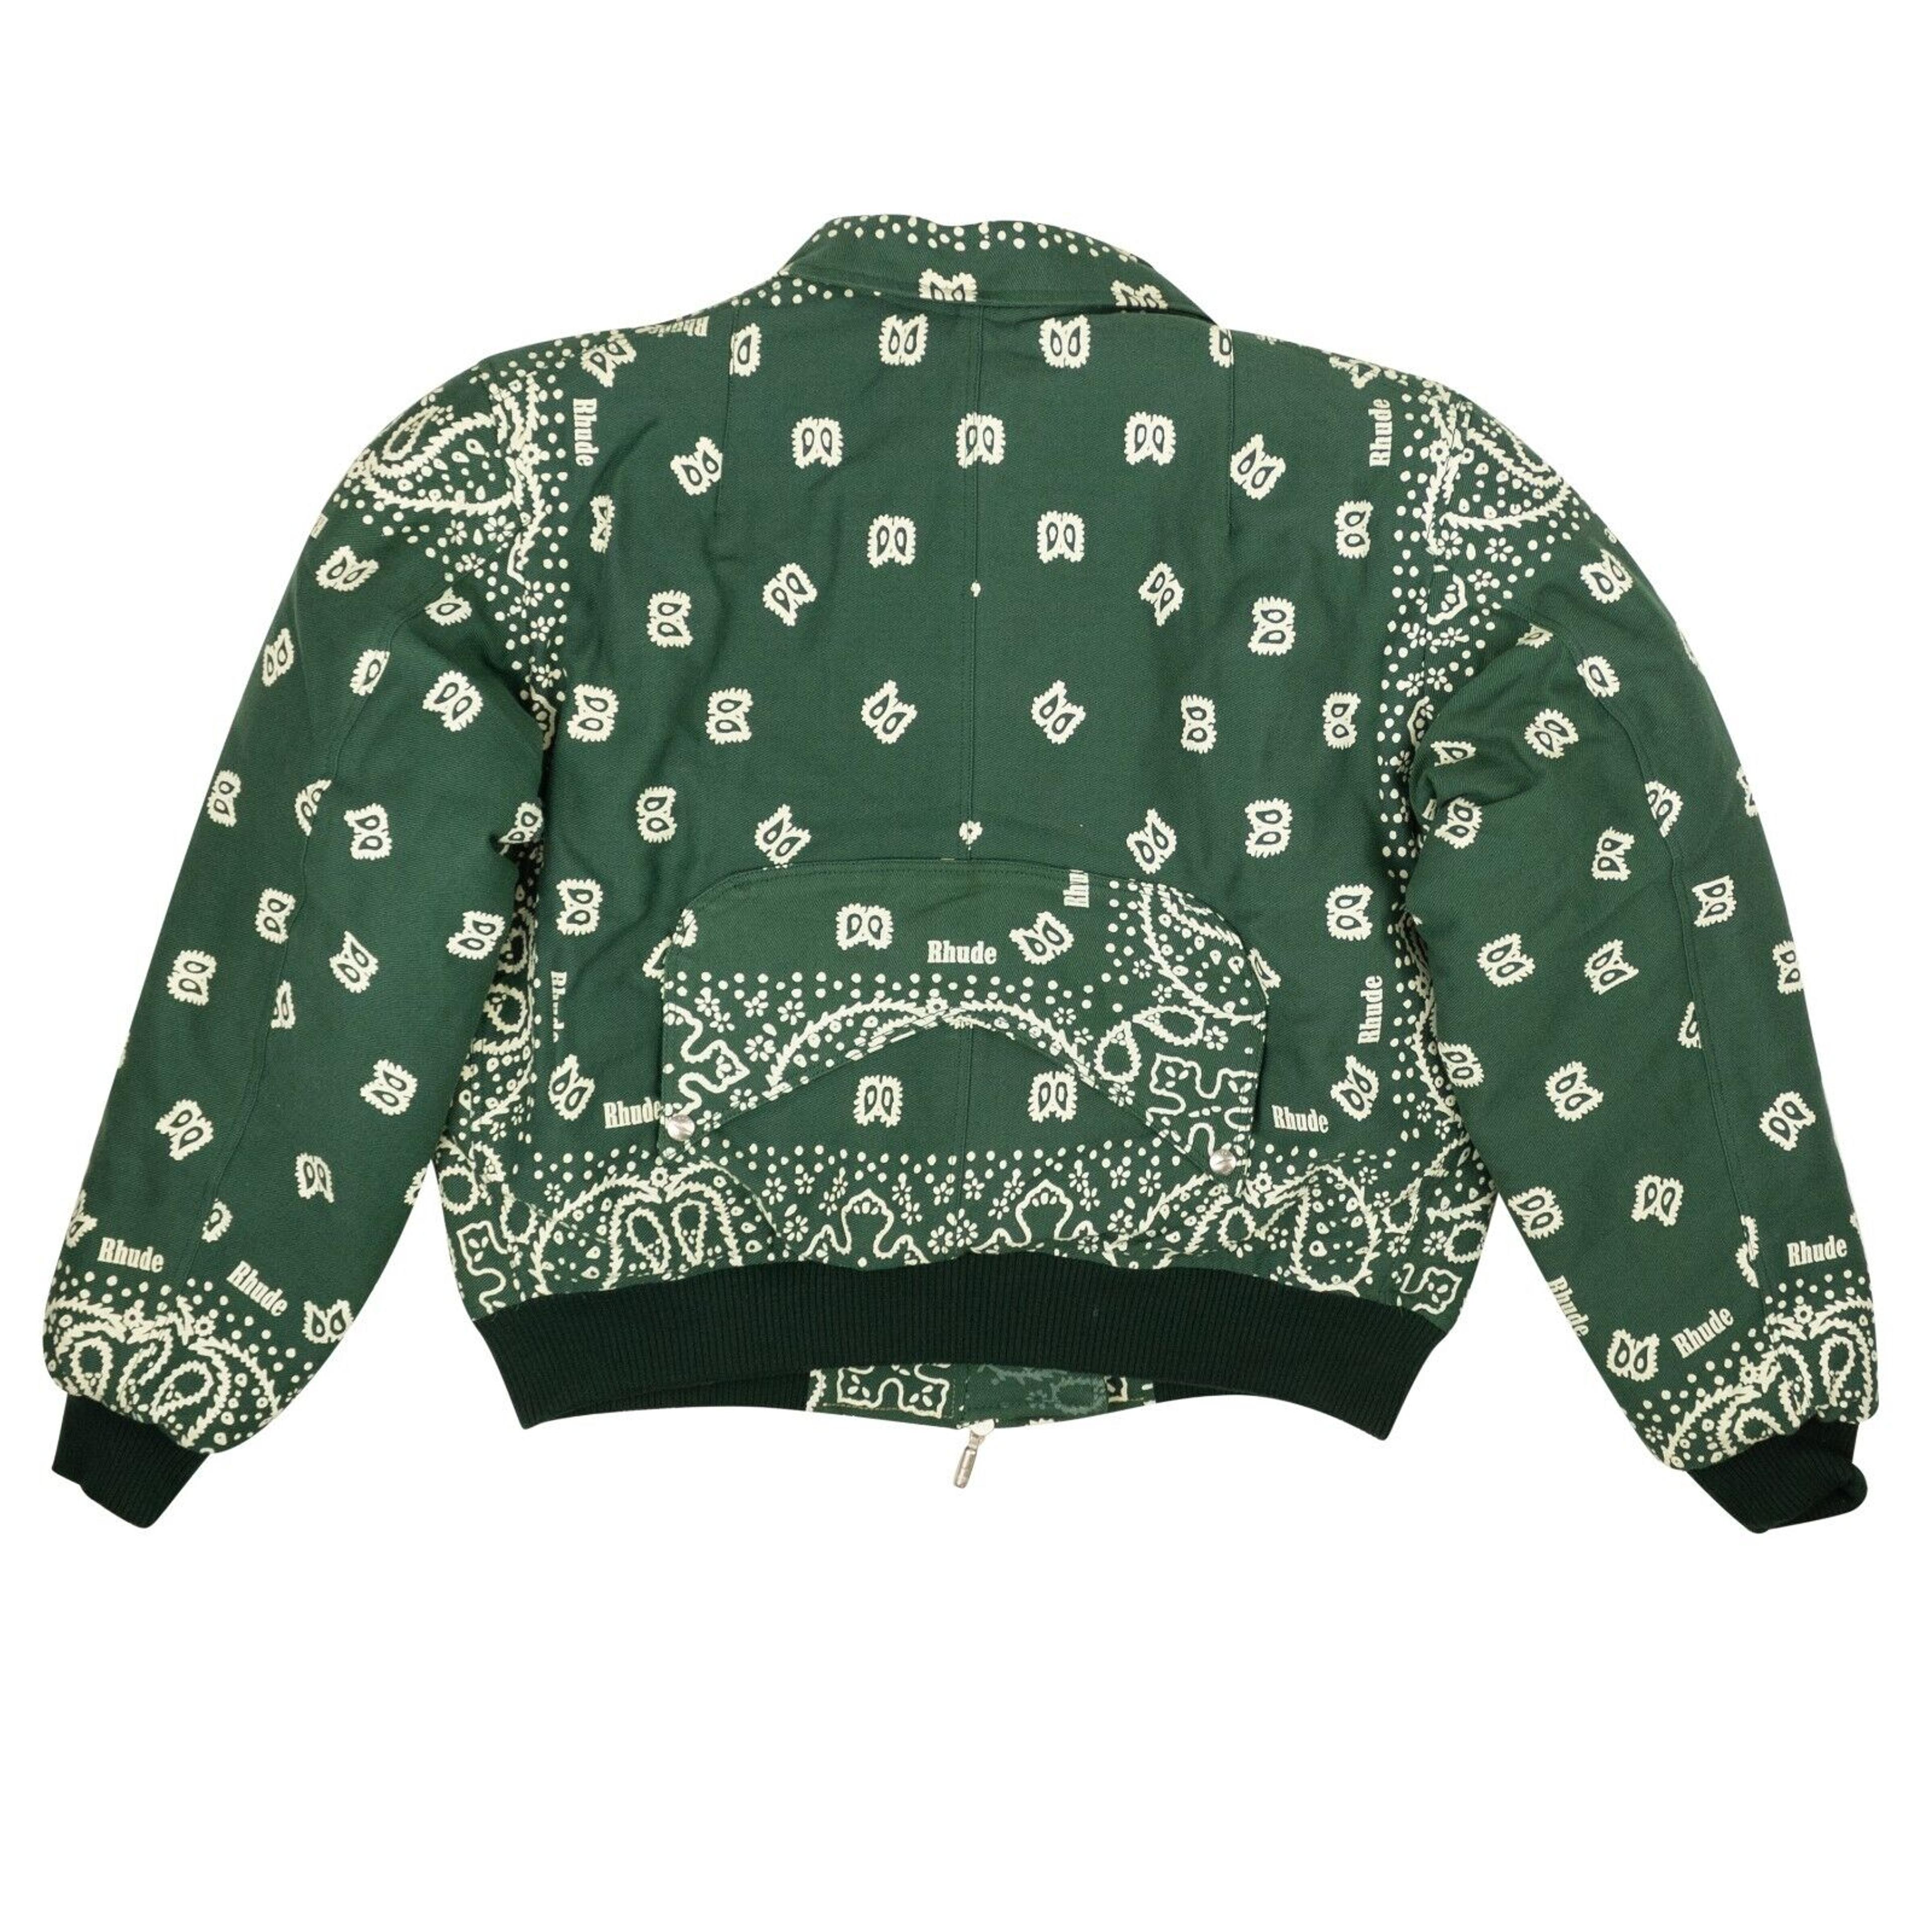 Alternate View 3 of Forest Green And Creme Cotton Lighting Bomber Jacket